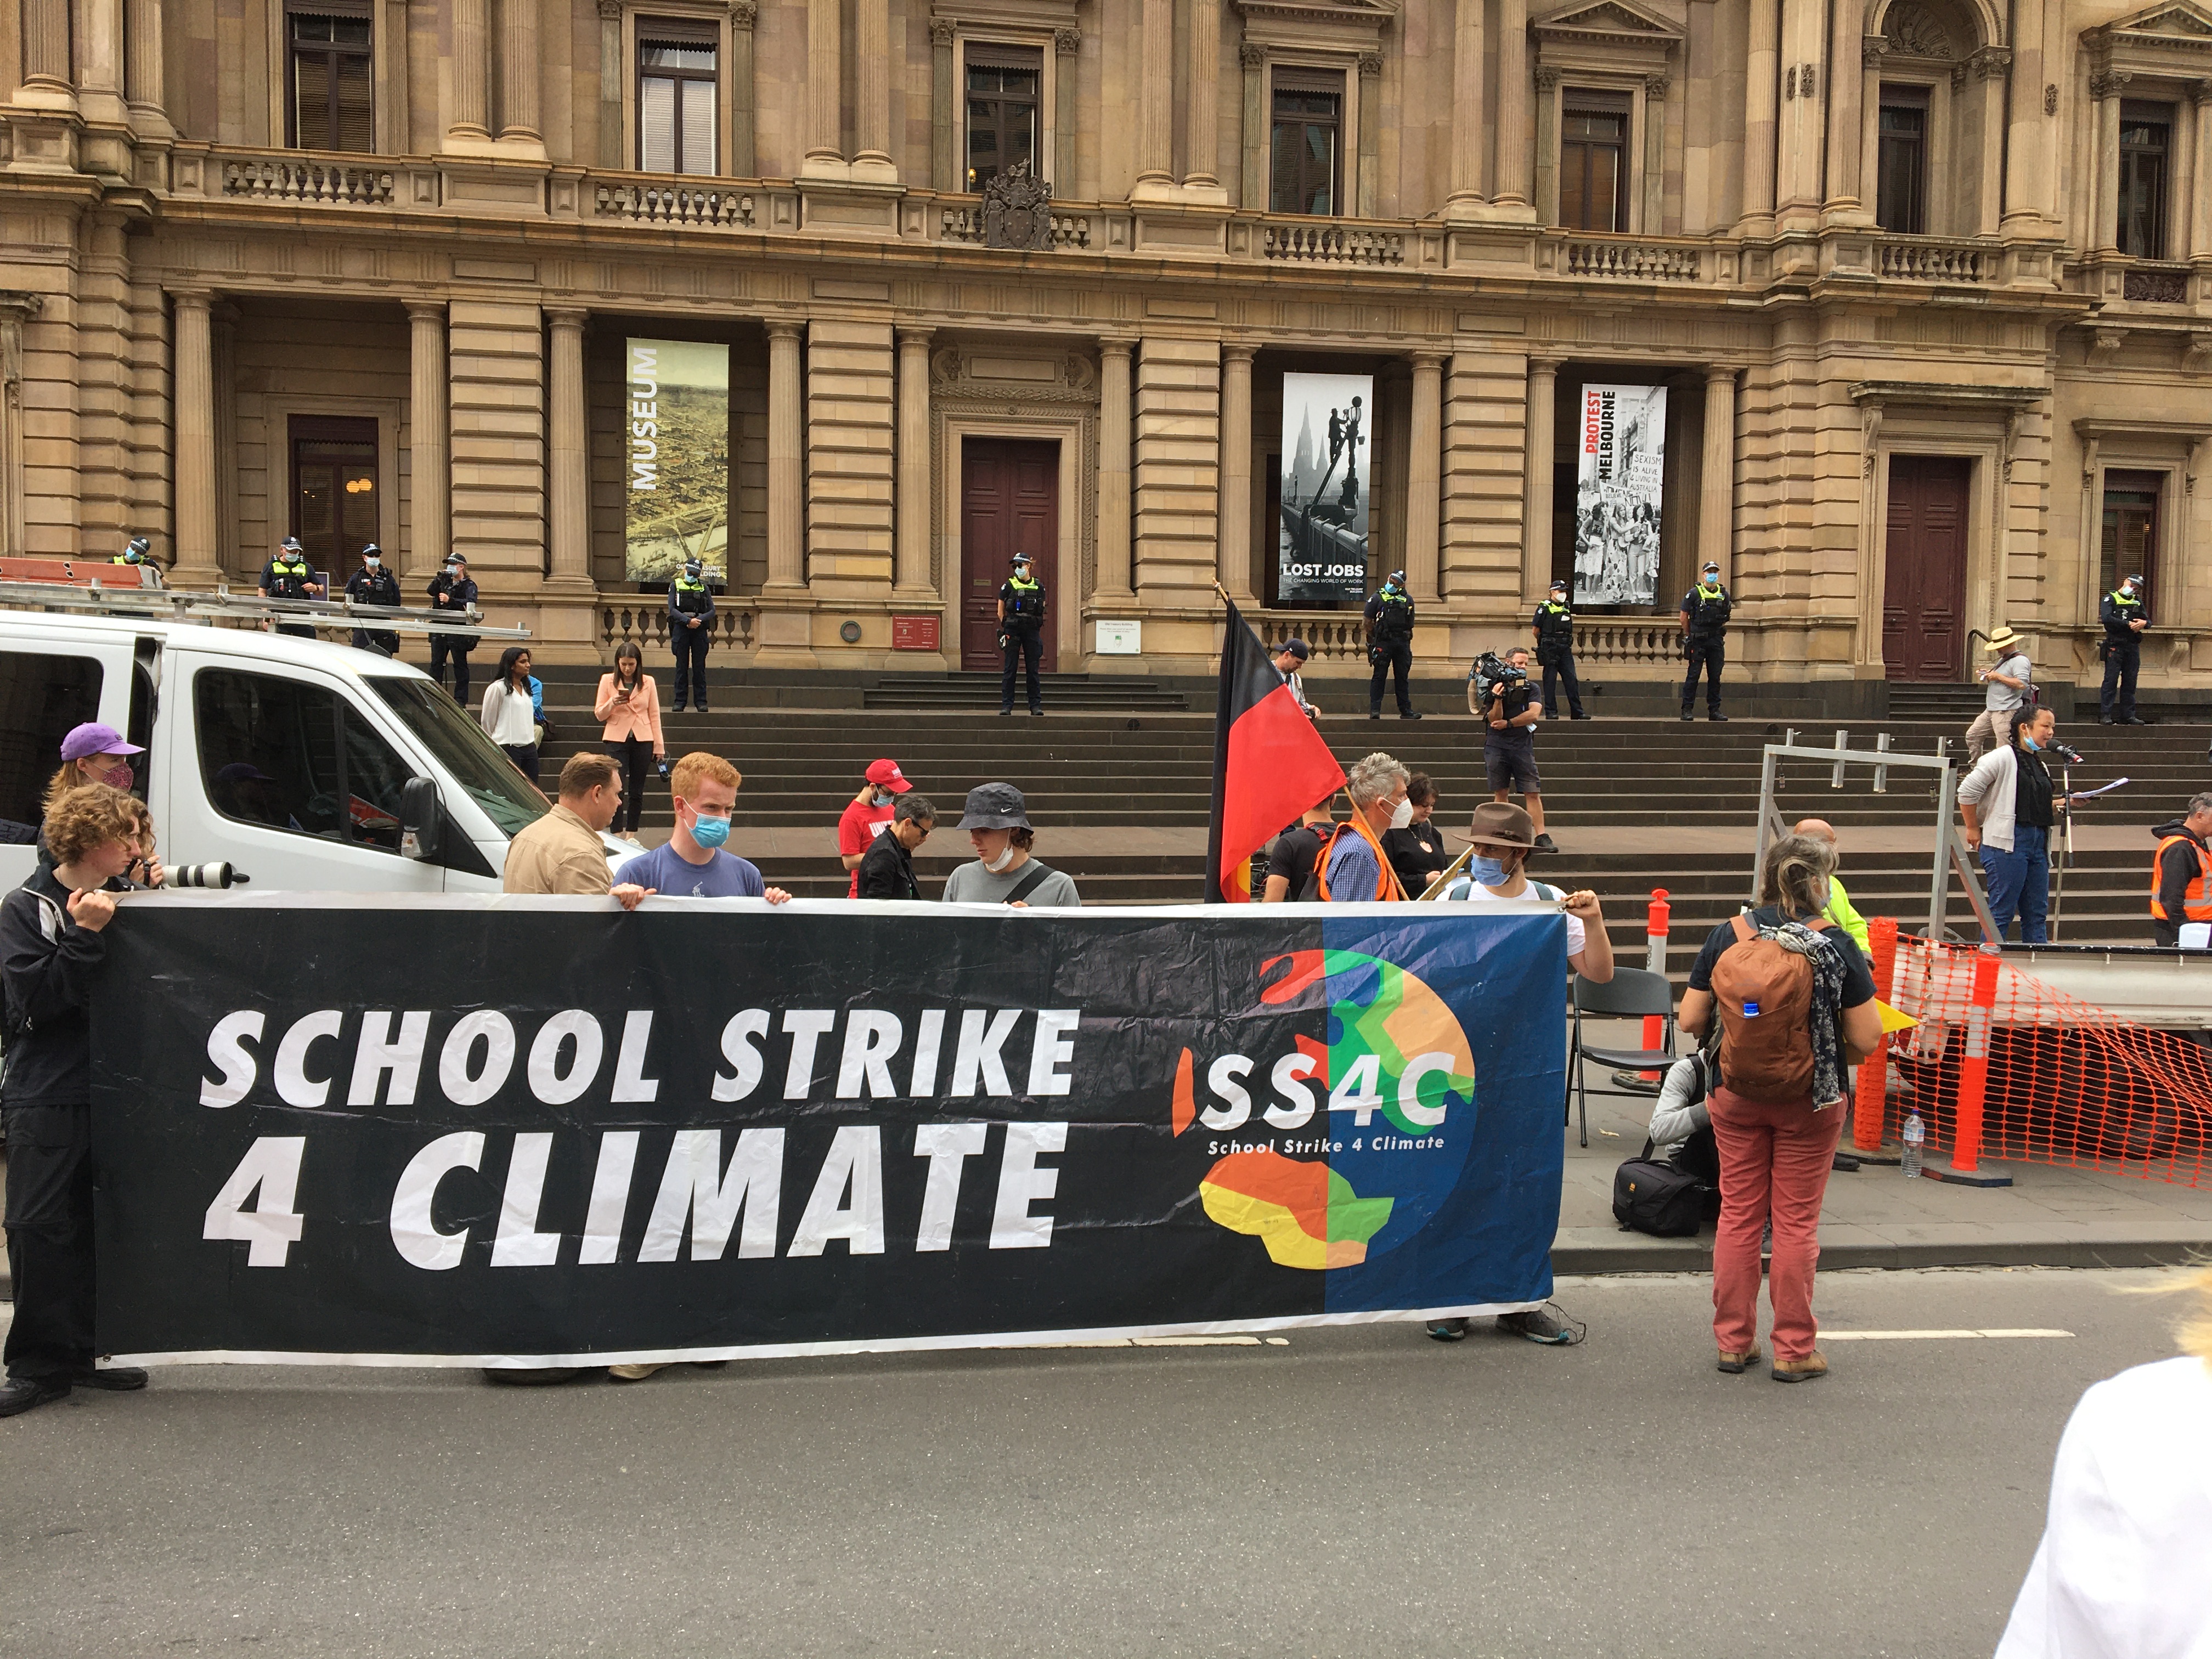 School Strike 4 Climate Naarm-Melbourne rally on Friday 25 March